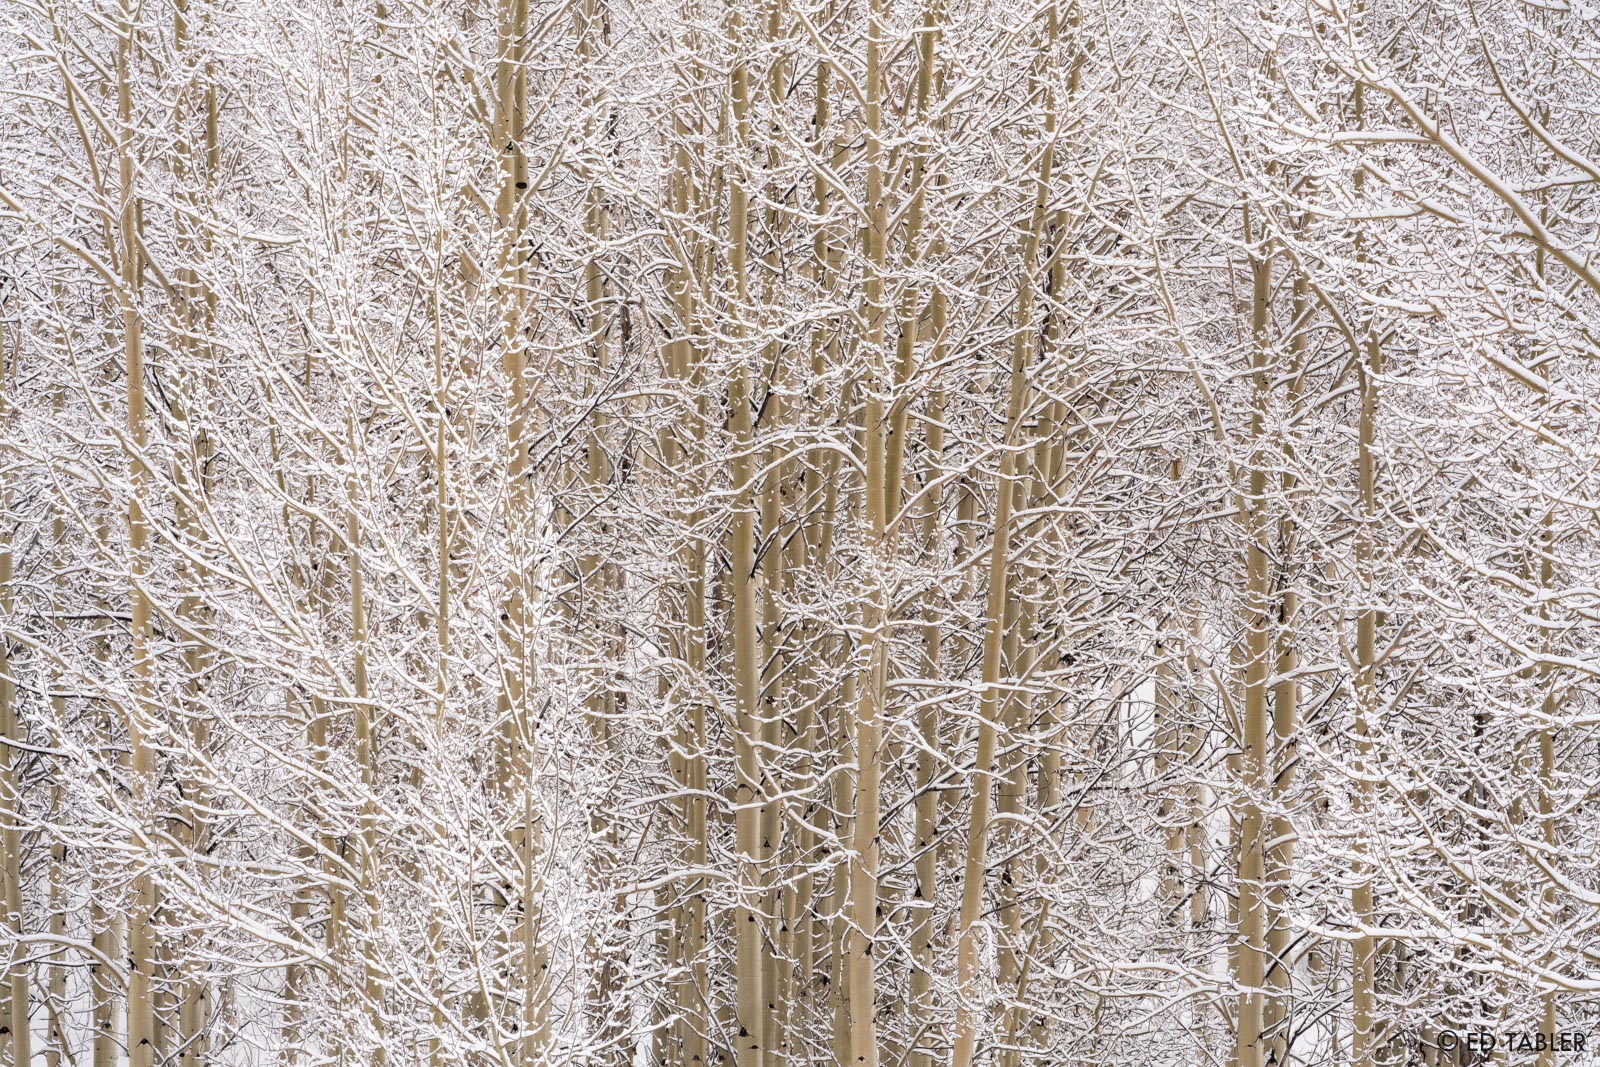 Snow-covered branches against the vertical&nbsp;lines of&nbsp;countless&nbsp;young aspen on a&nbsp;cold winter morning&nbsp;create...